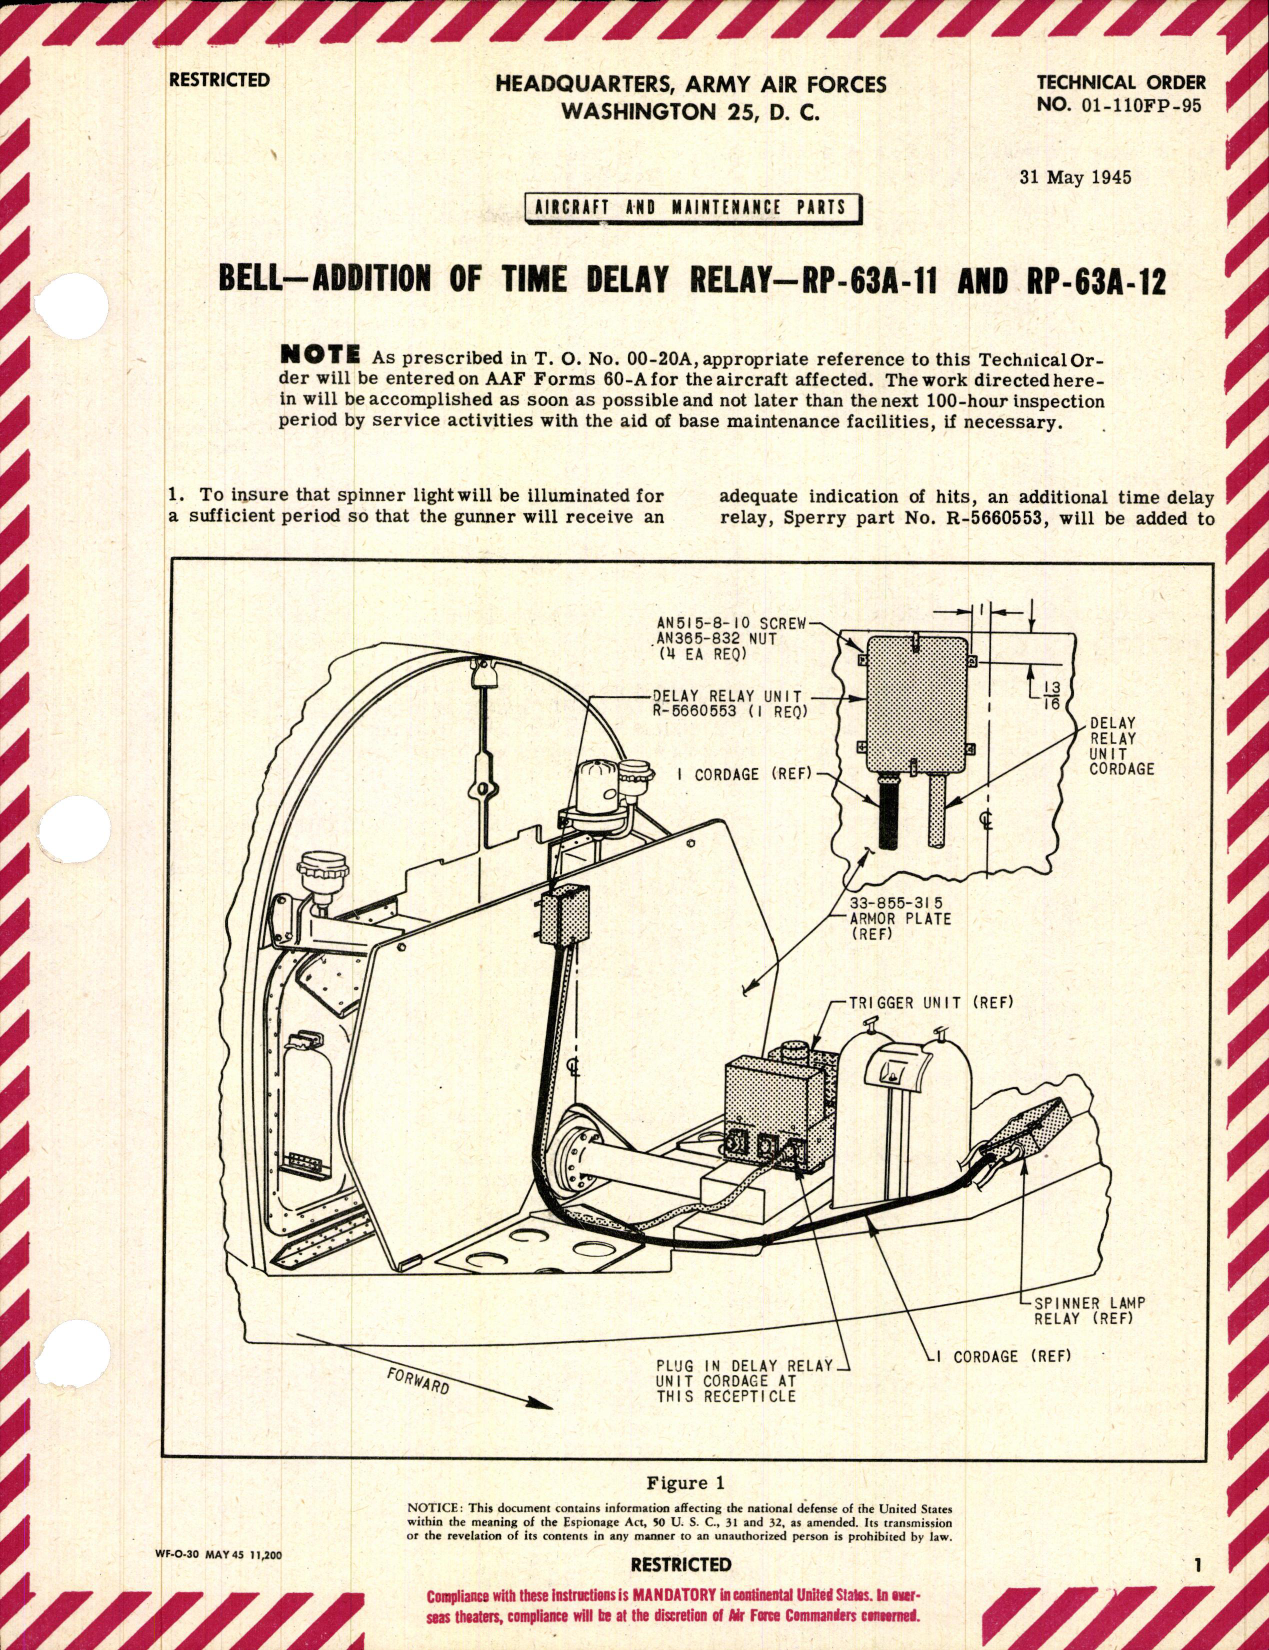 Sample page 1 from AirCorps Library document: Addition of Time Delay Relay for RP-63A